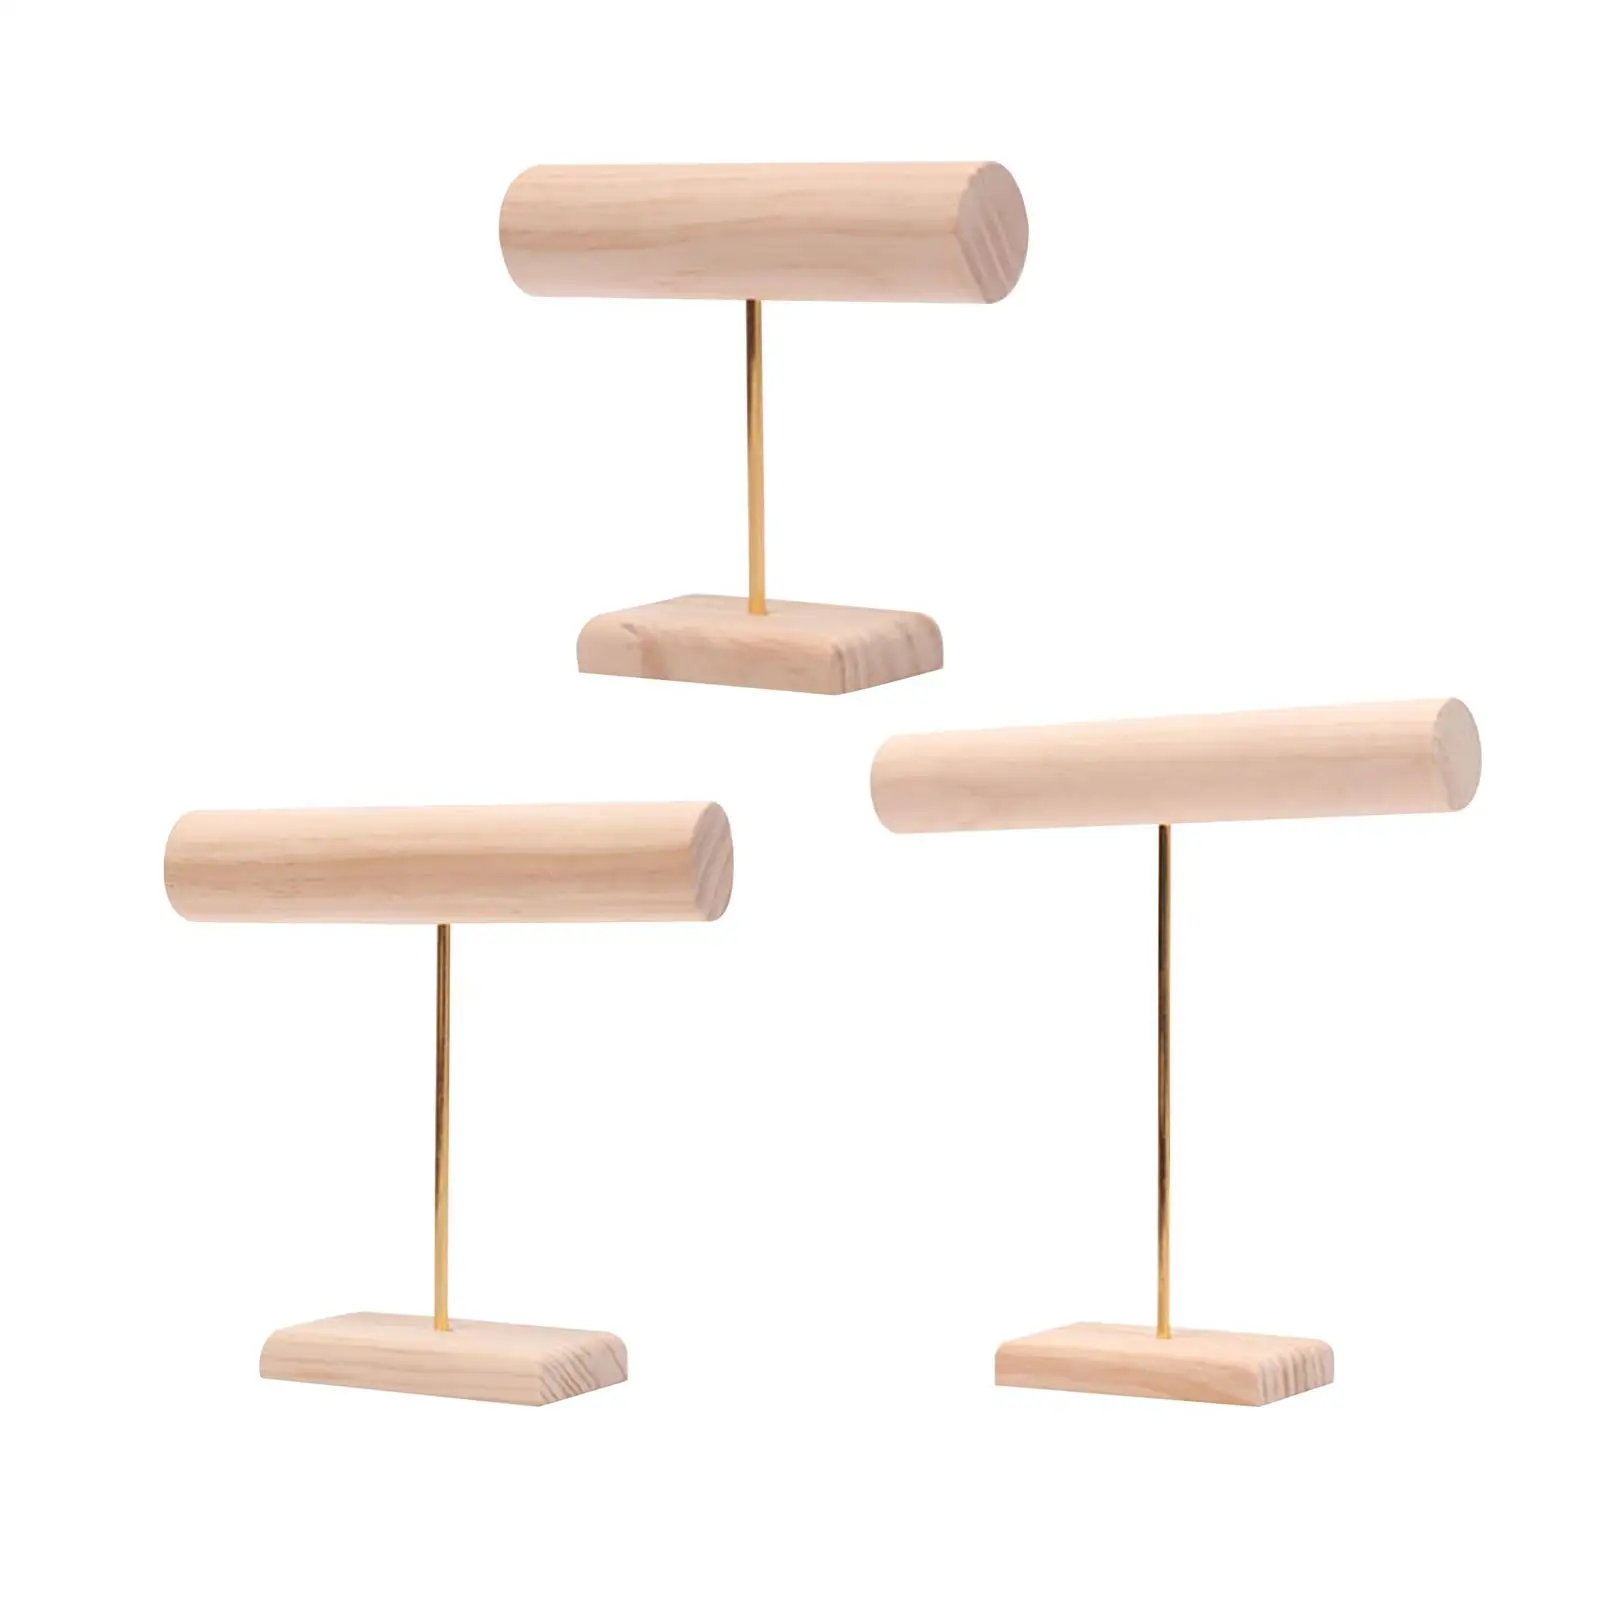 Wood Jewelry Display Stand Vertical Organizer Bracelet Storage Rack for Necklace Desktop Jewelry Store Personal Use Display Case